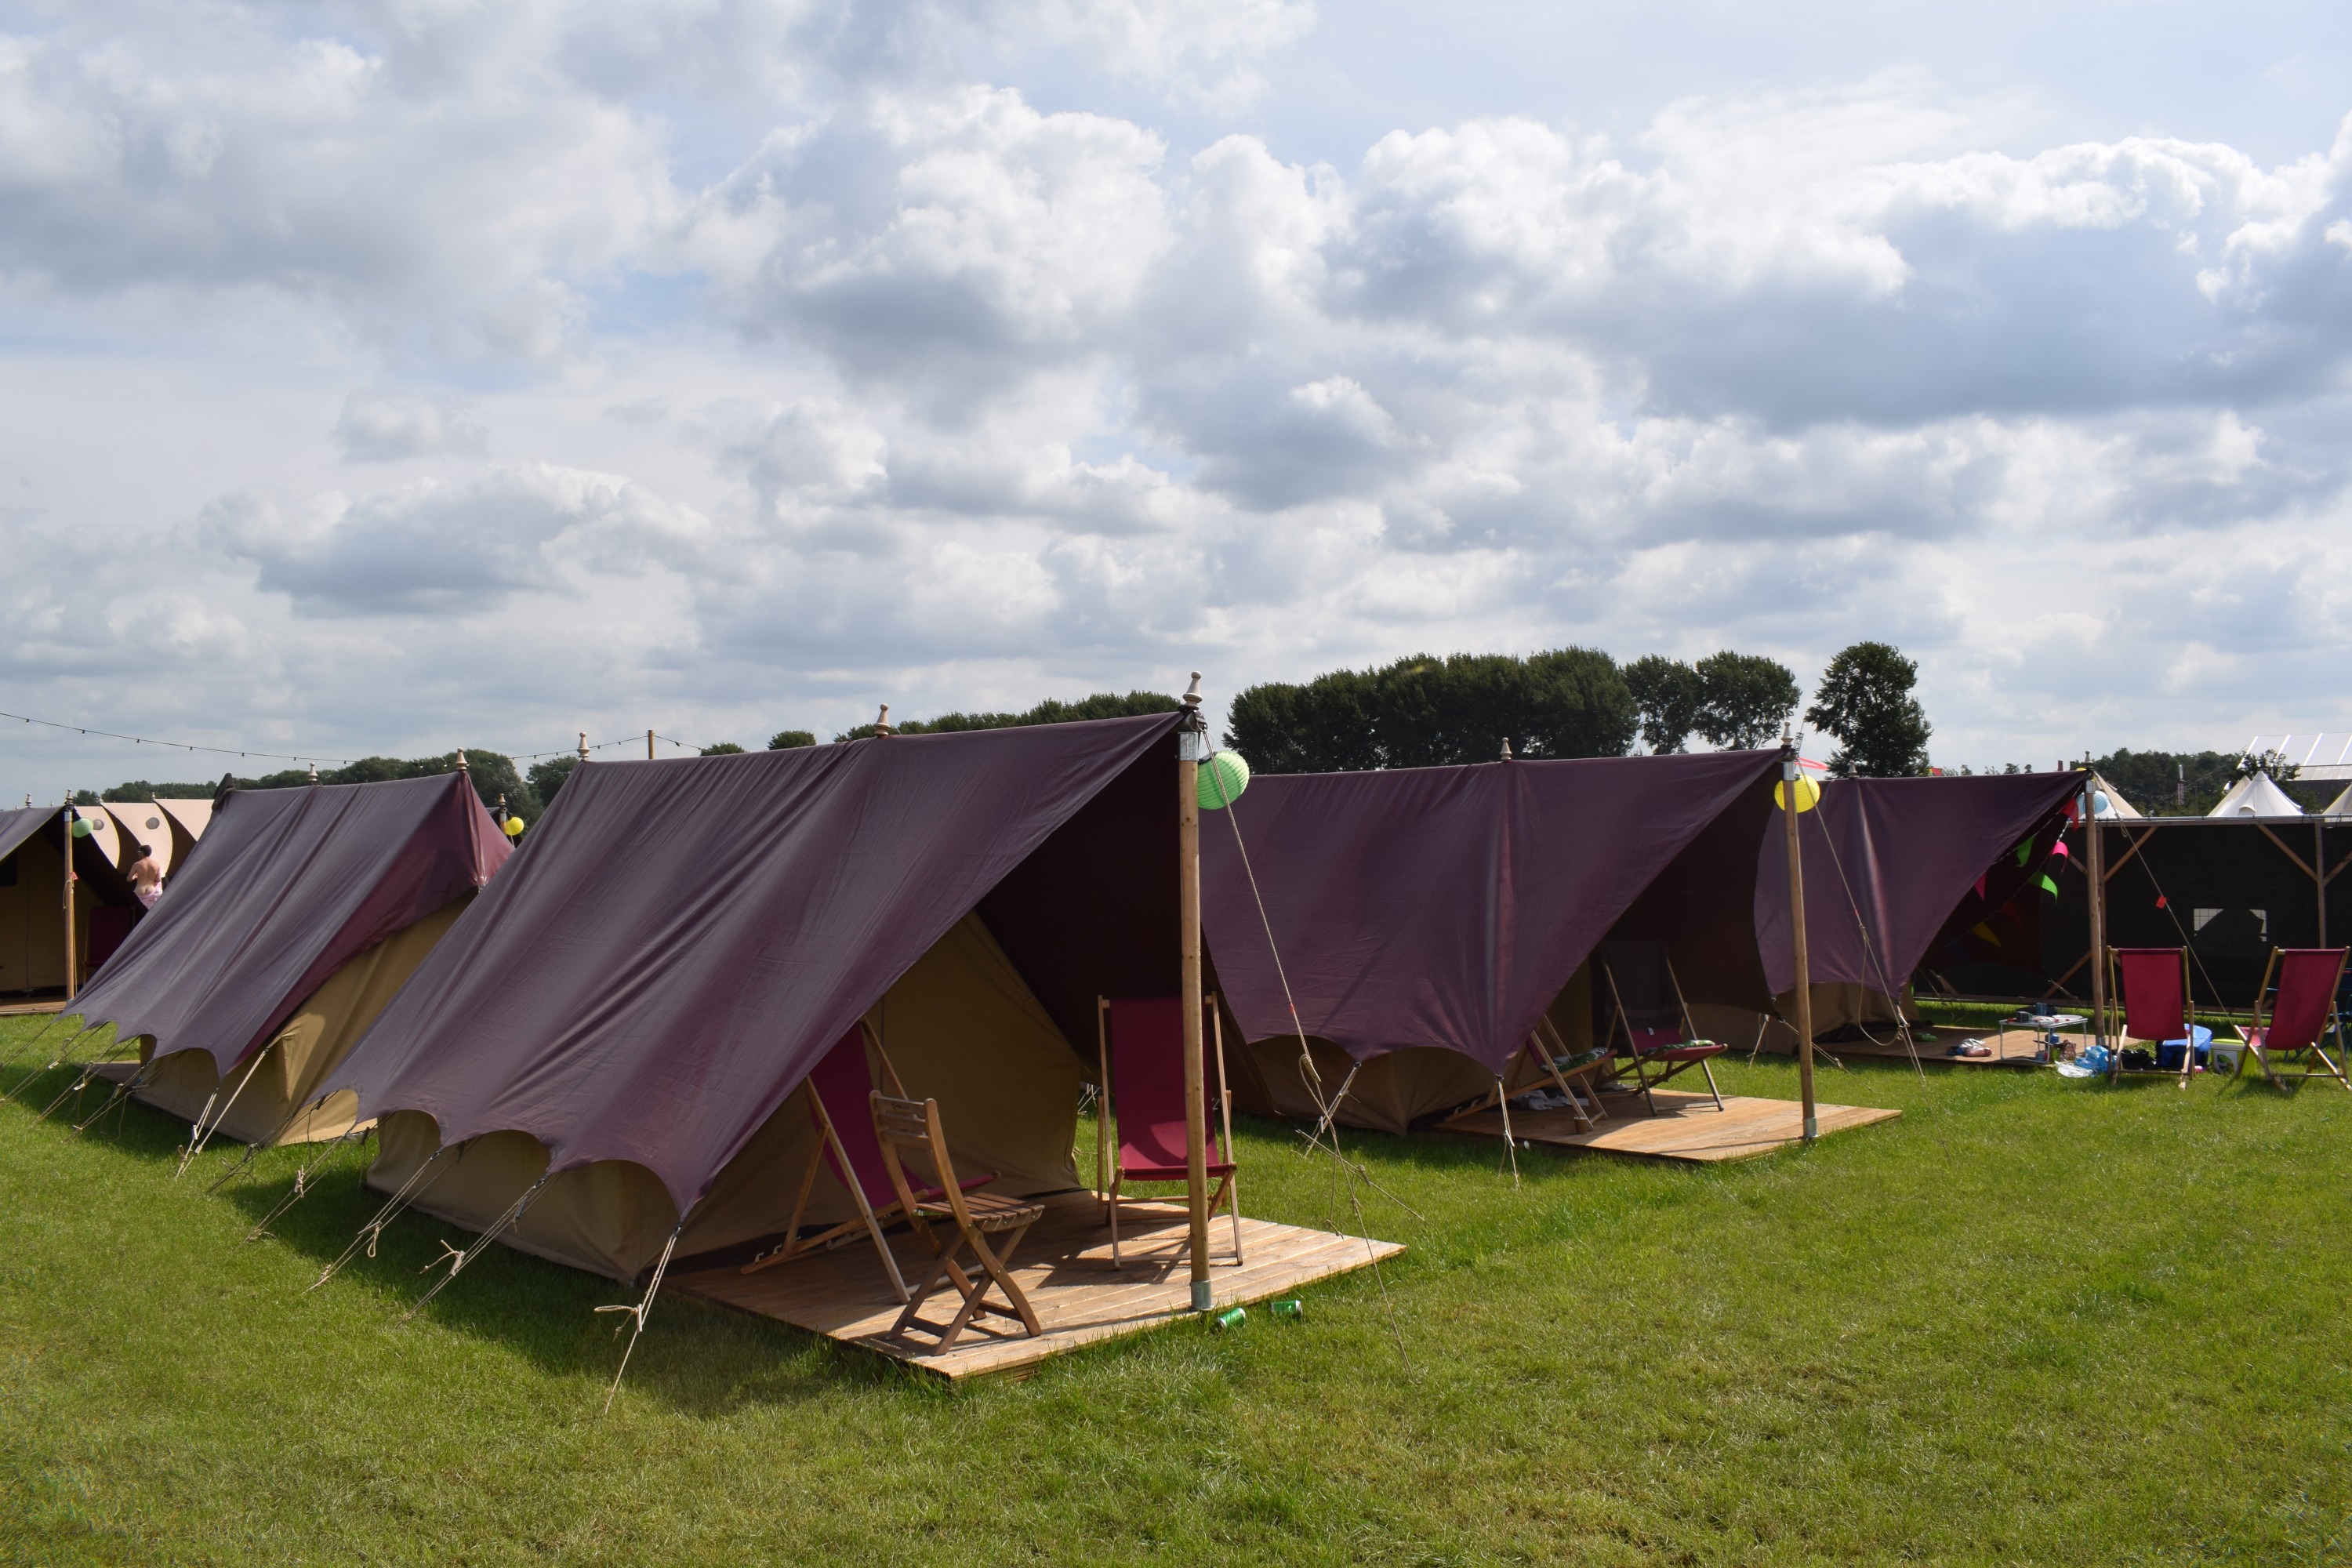 Gllampcamp Deluxe Lowlands Campsolutions Awaji glamping op Lowlands